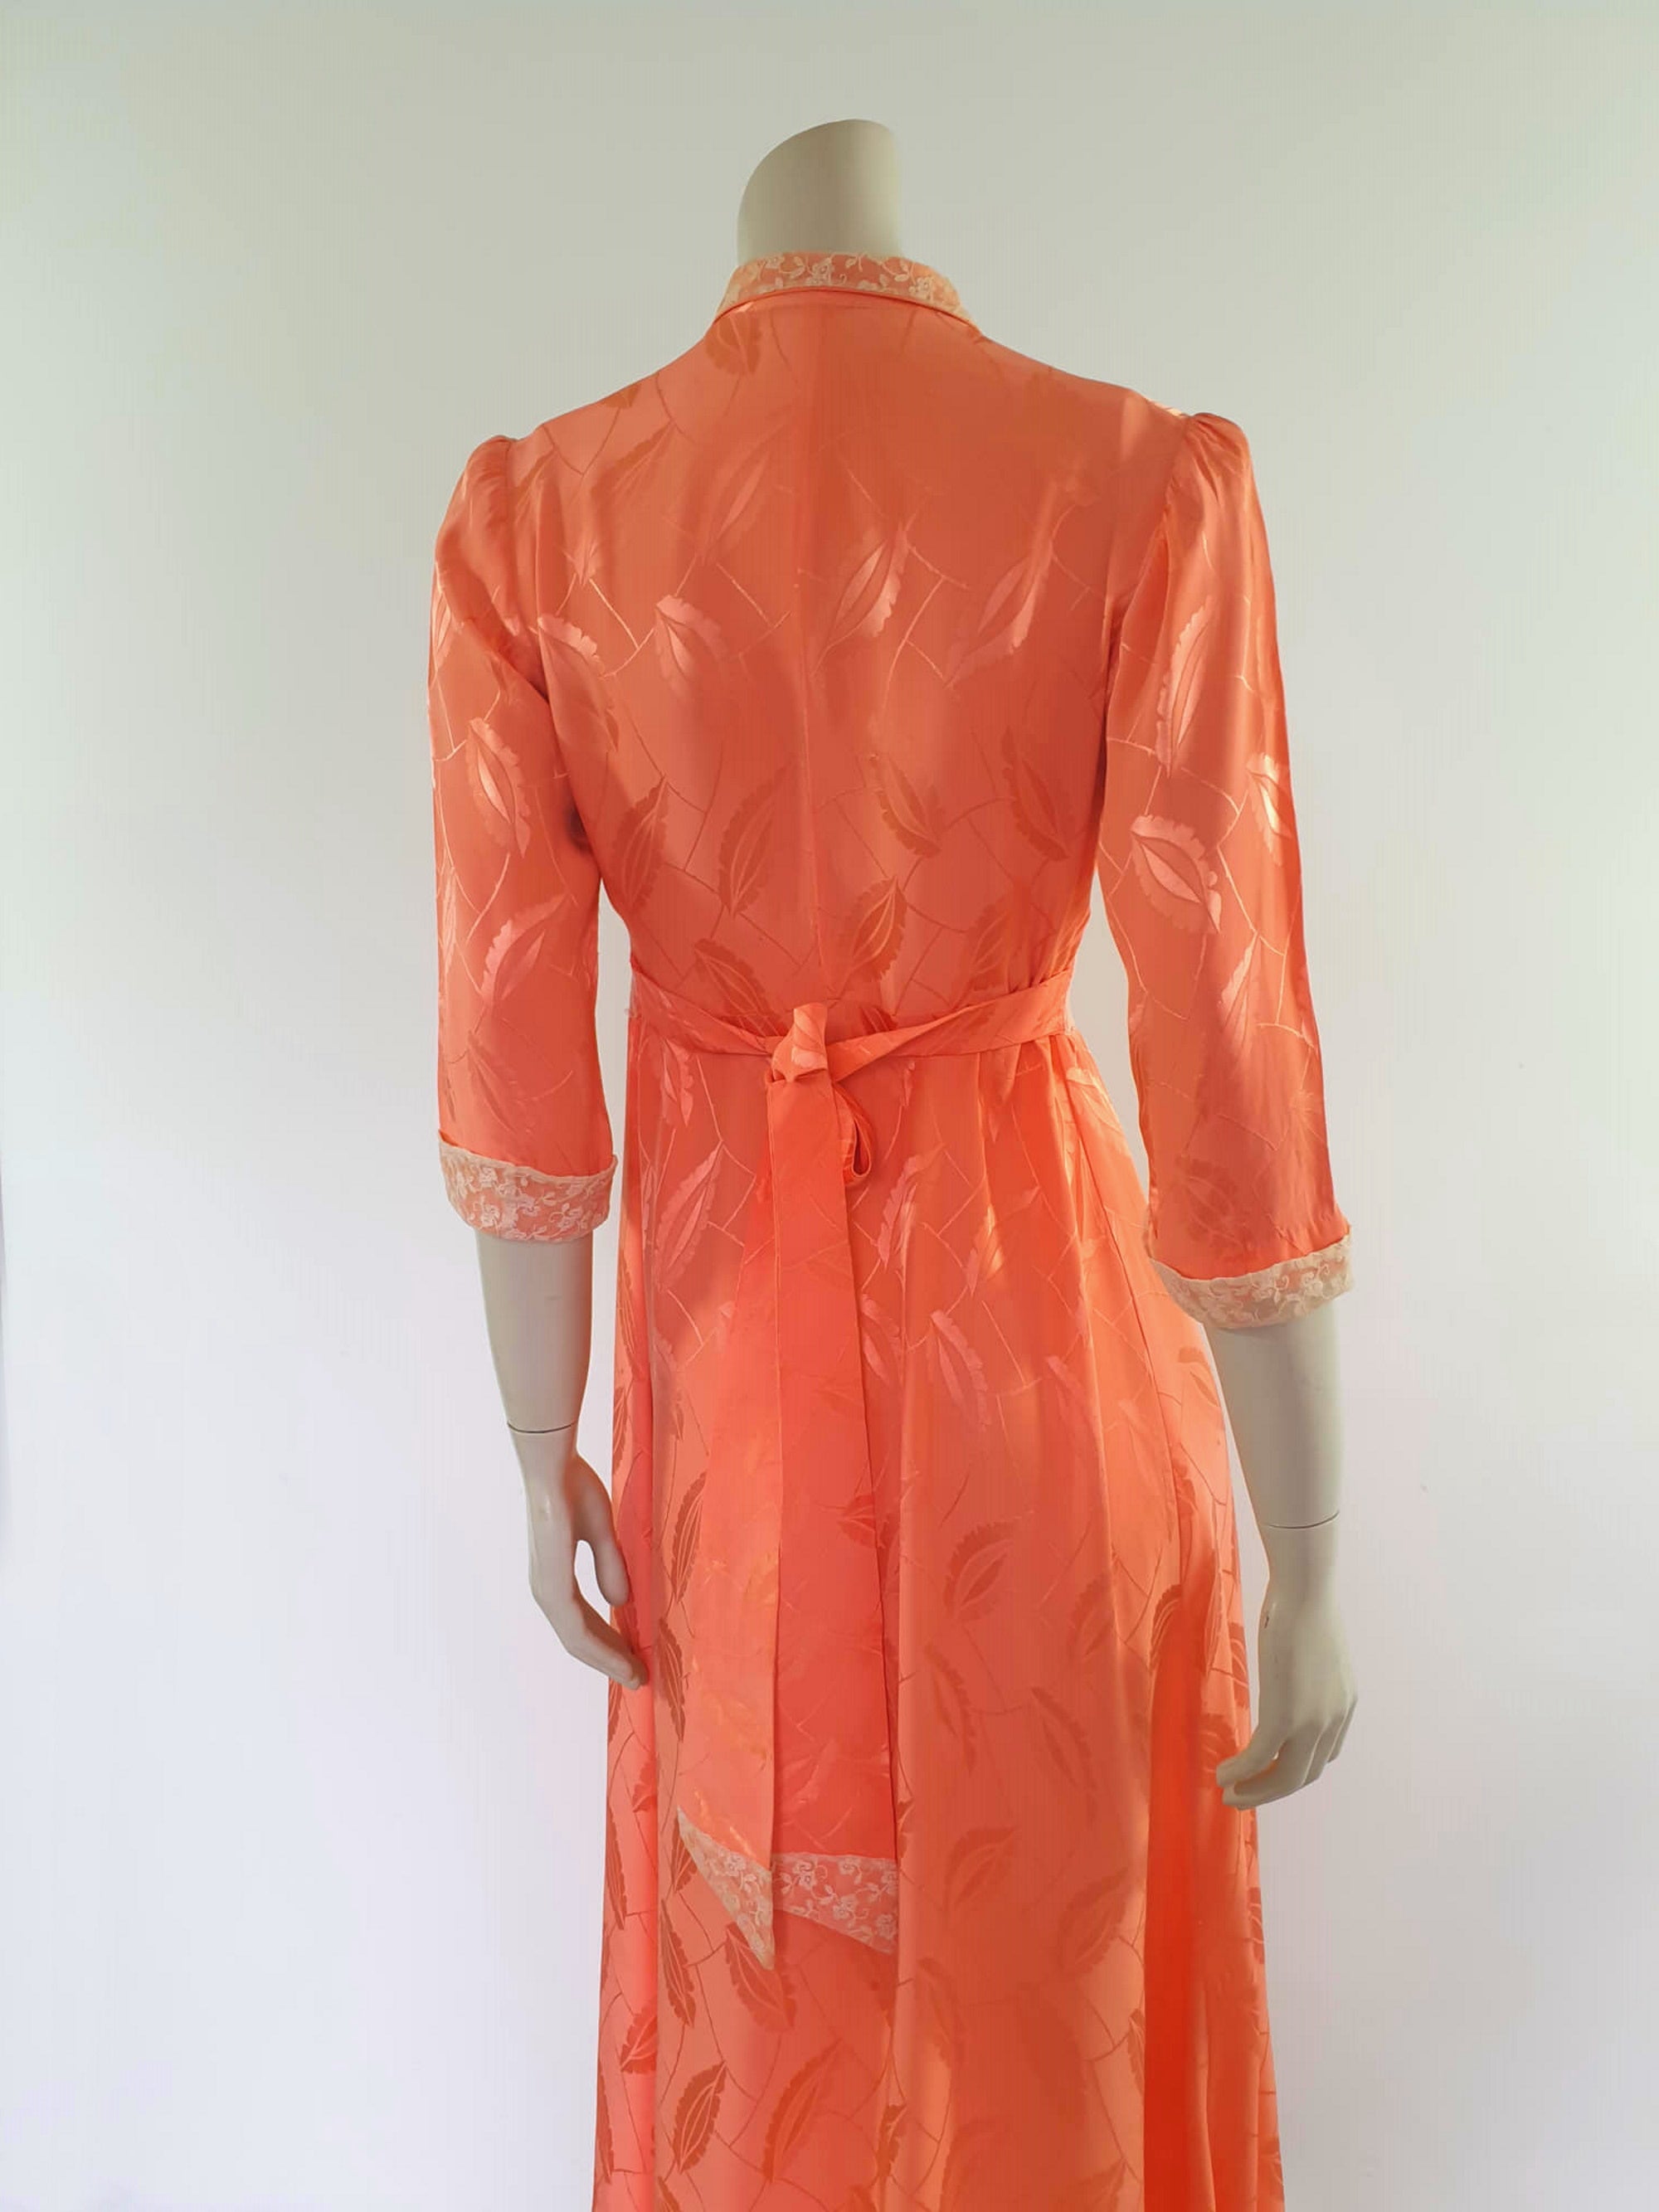 1940s vintage peach house coat or zip front robe with lace